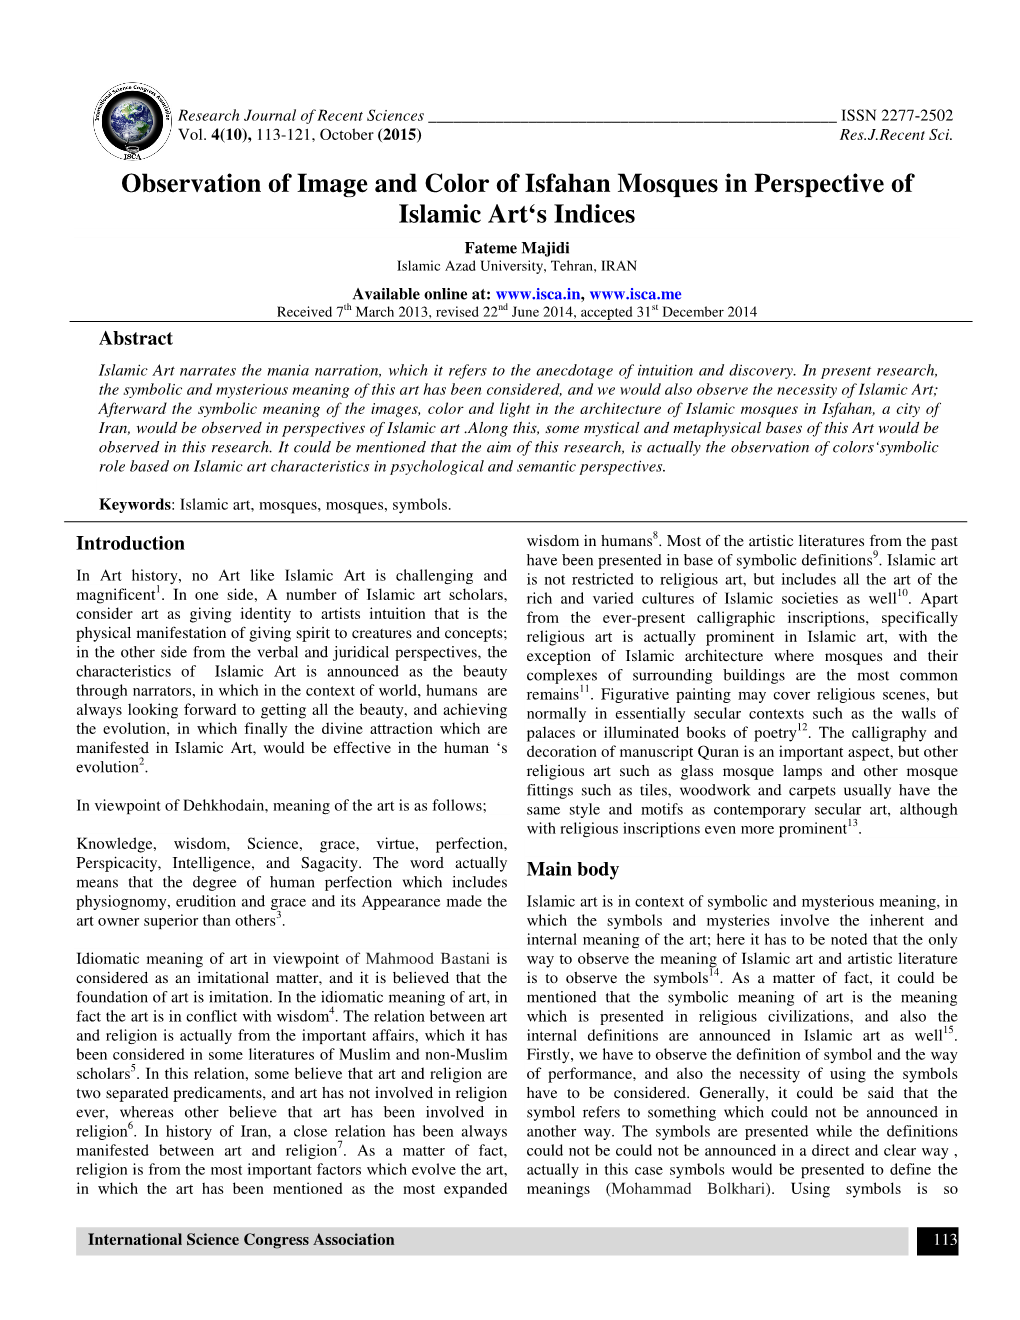 Observation of Image and Color of Isfahan Mosques in Perspective of Islamic Art‘S Indices